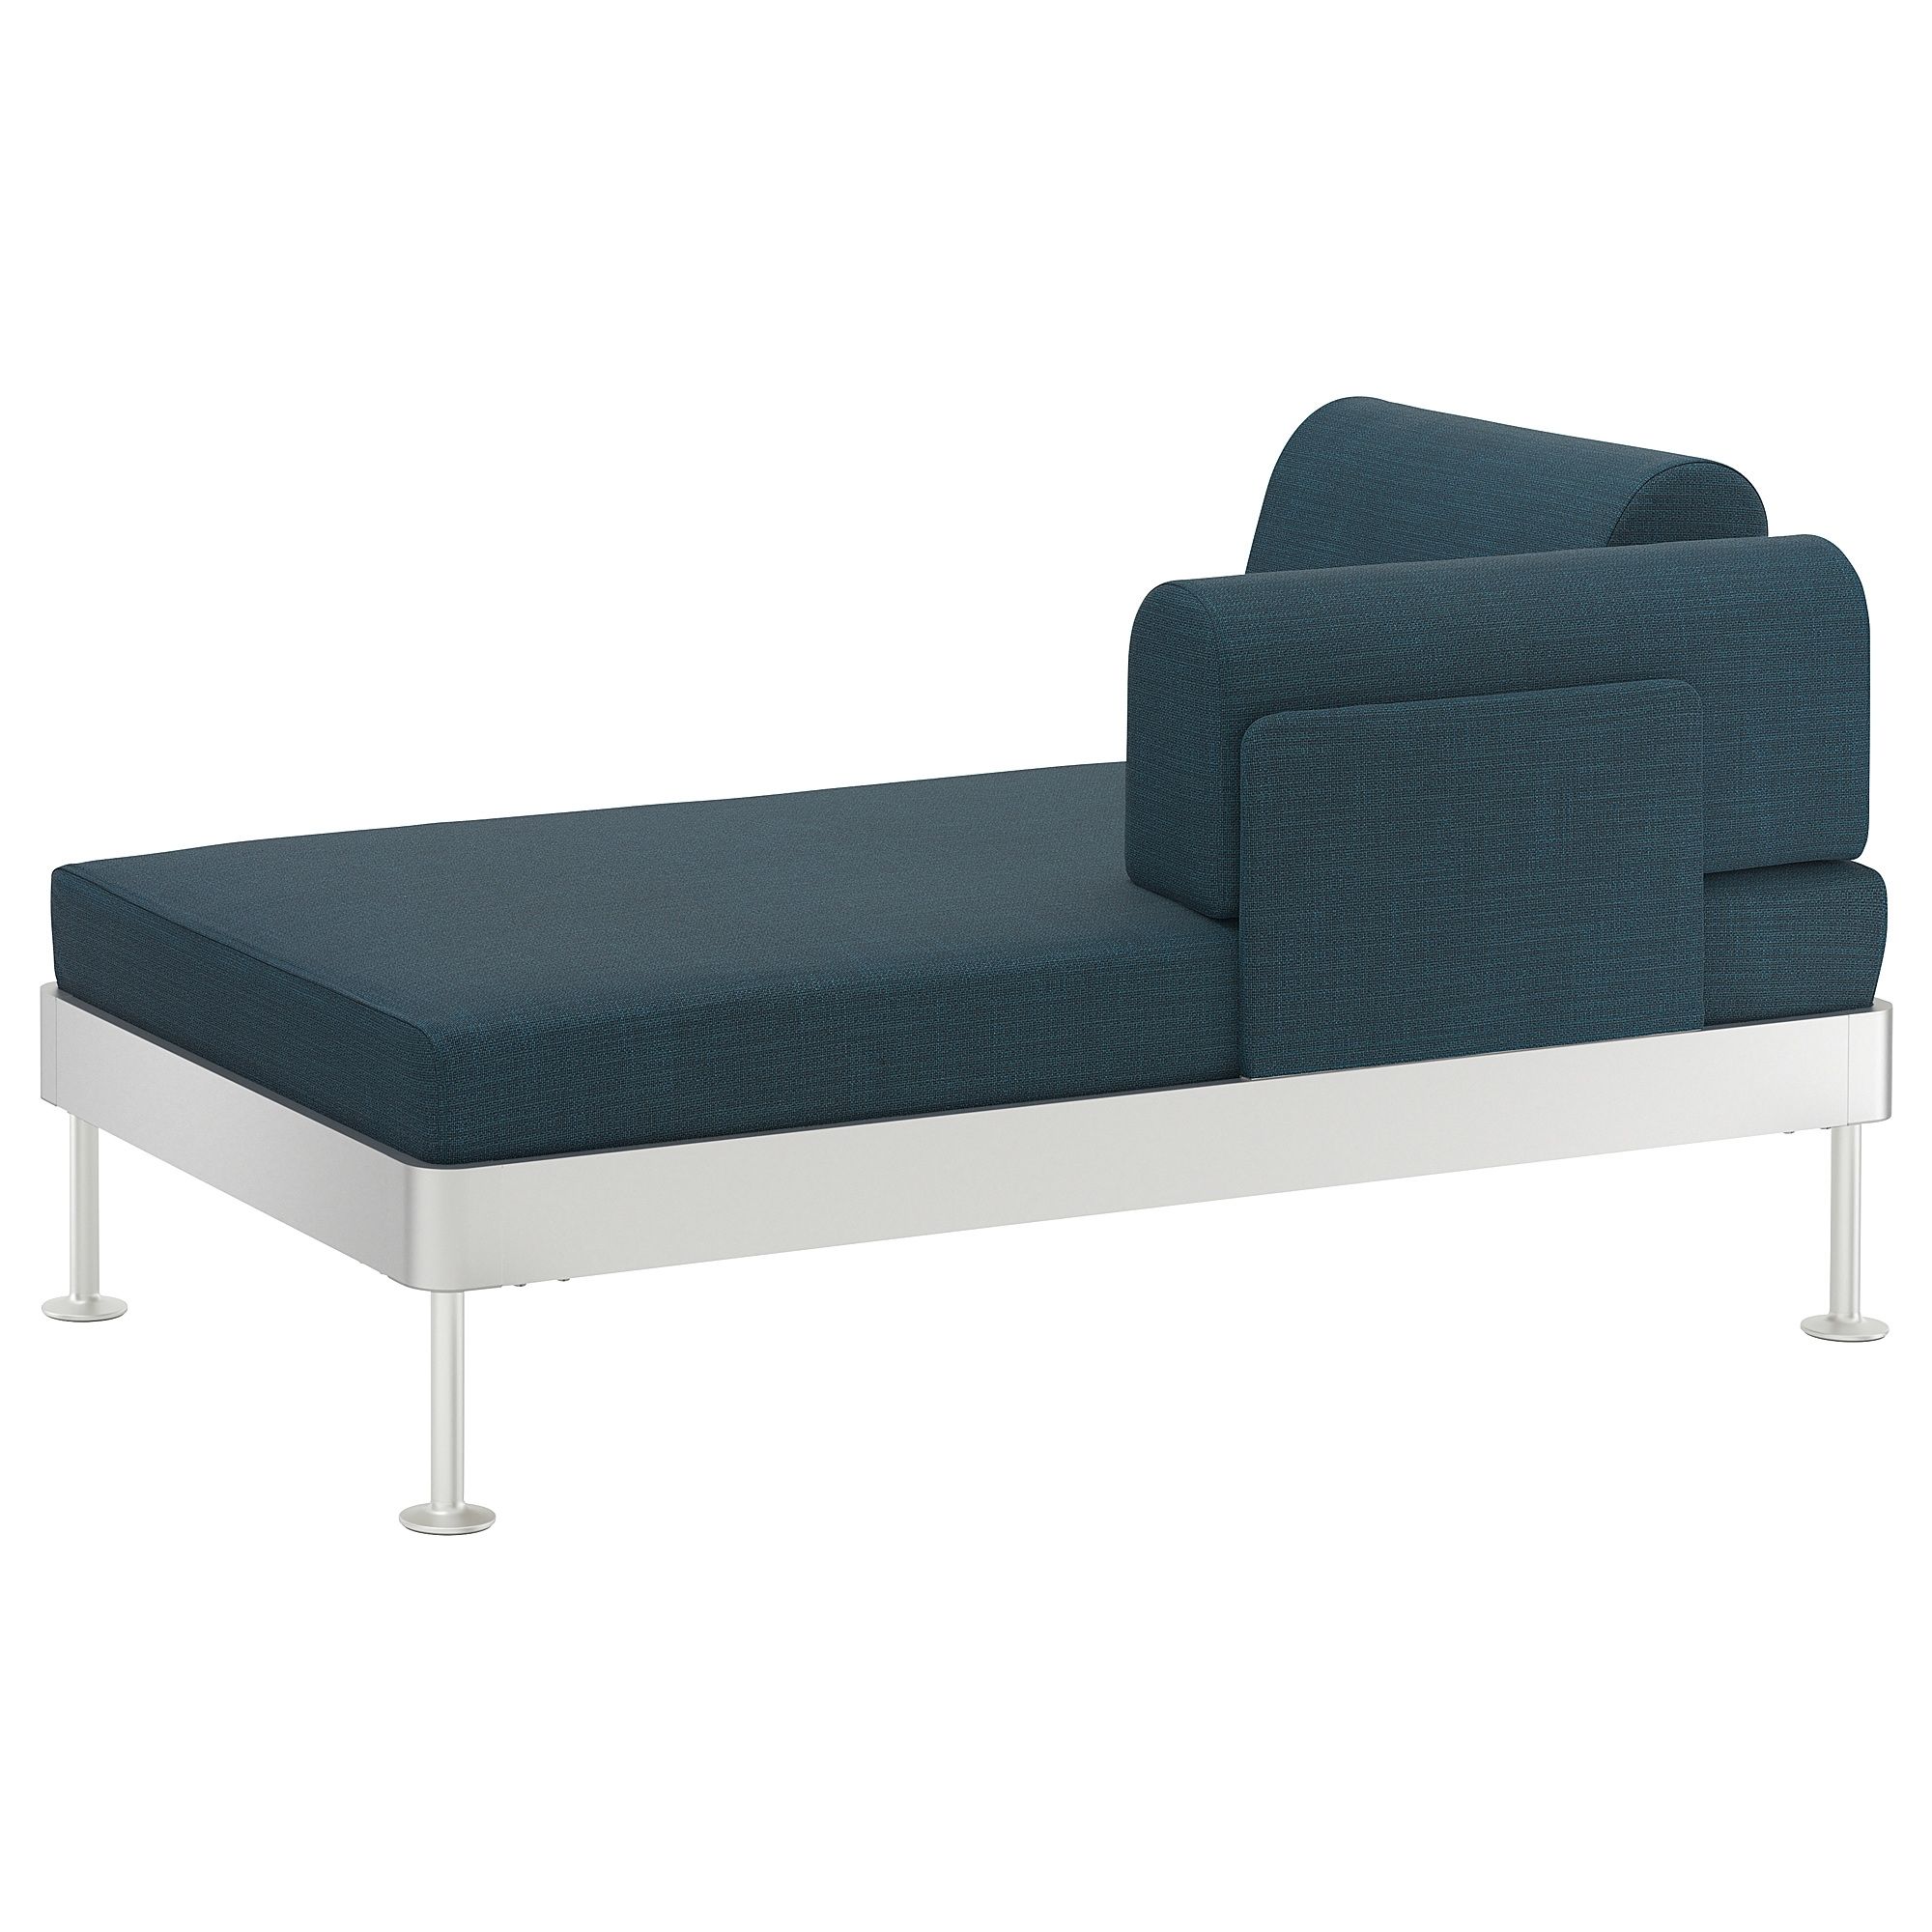 Favorite Delaktig Chaise Longue With Armrest Hillared Dark Blue – Ikea For Ikea Chaise Longues (View 1 of 15)